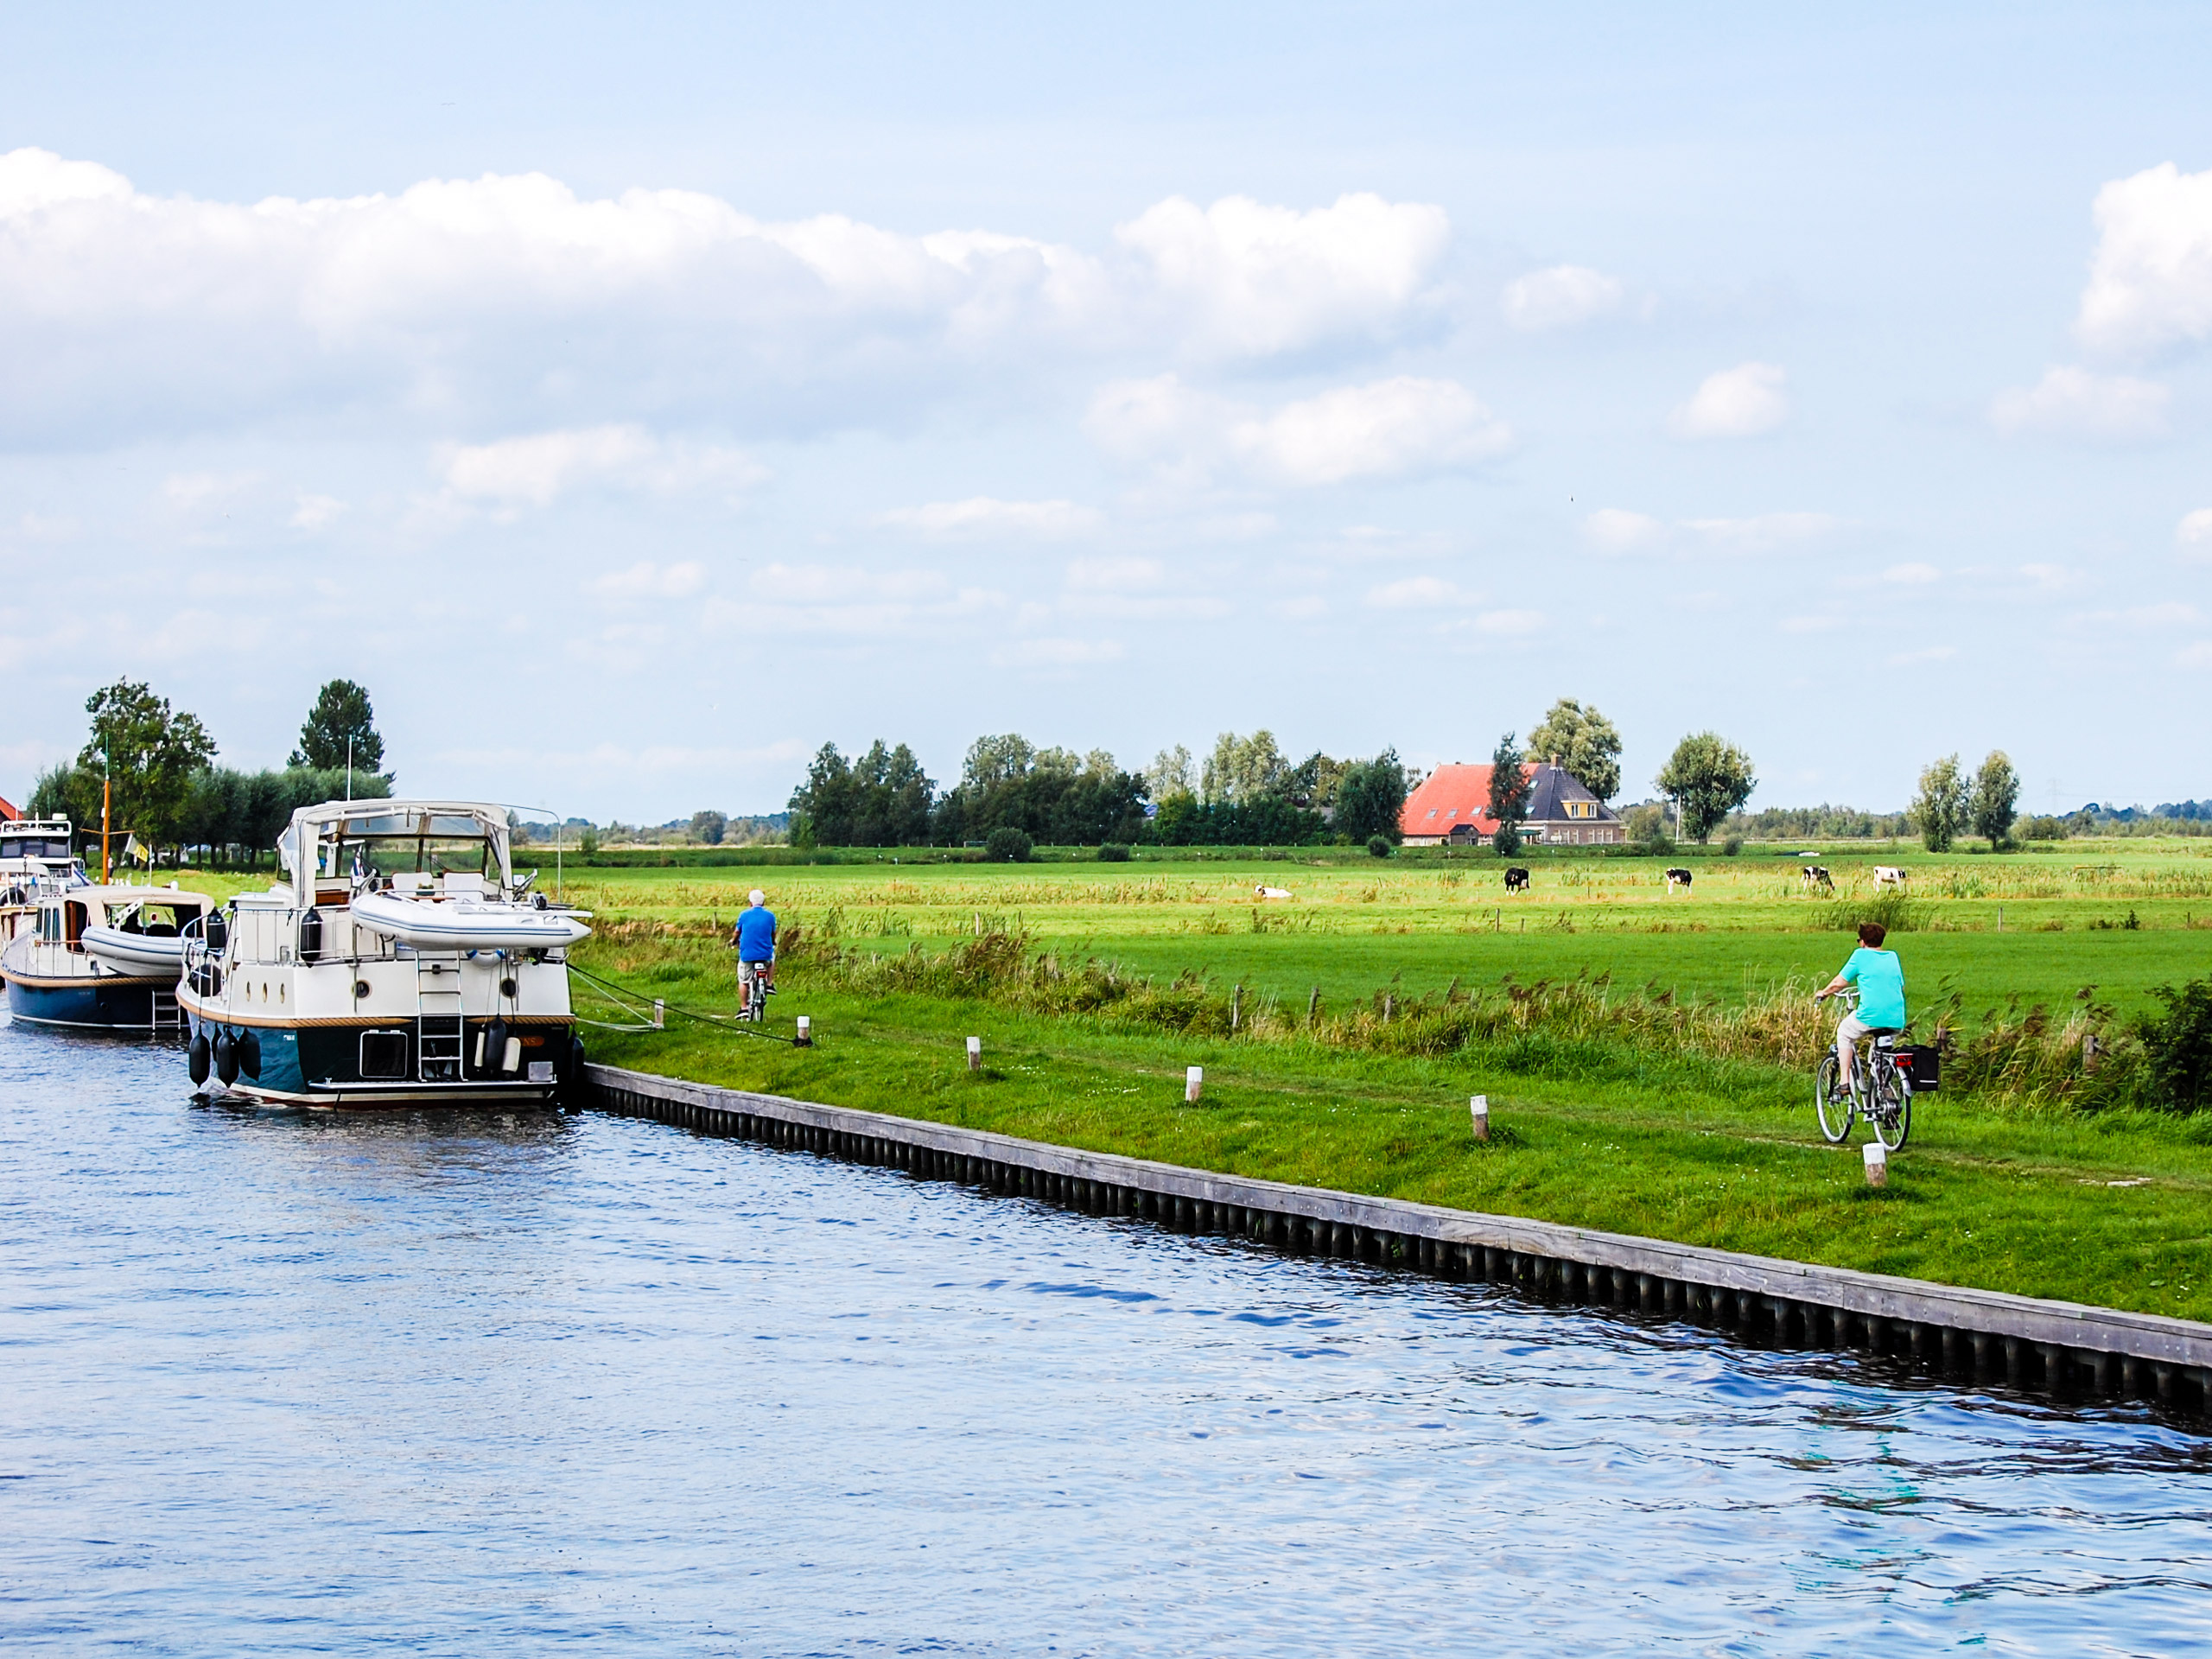 Boats on the river in Friesland